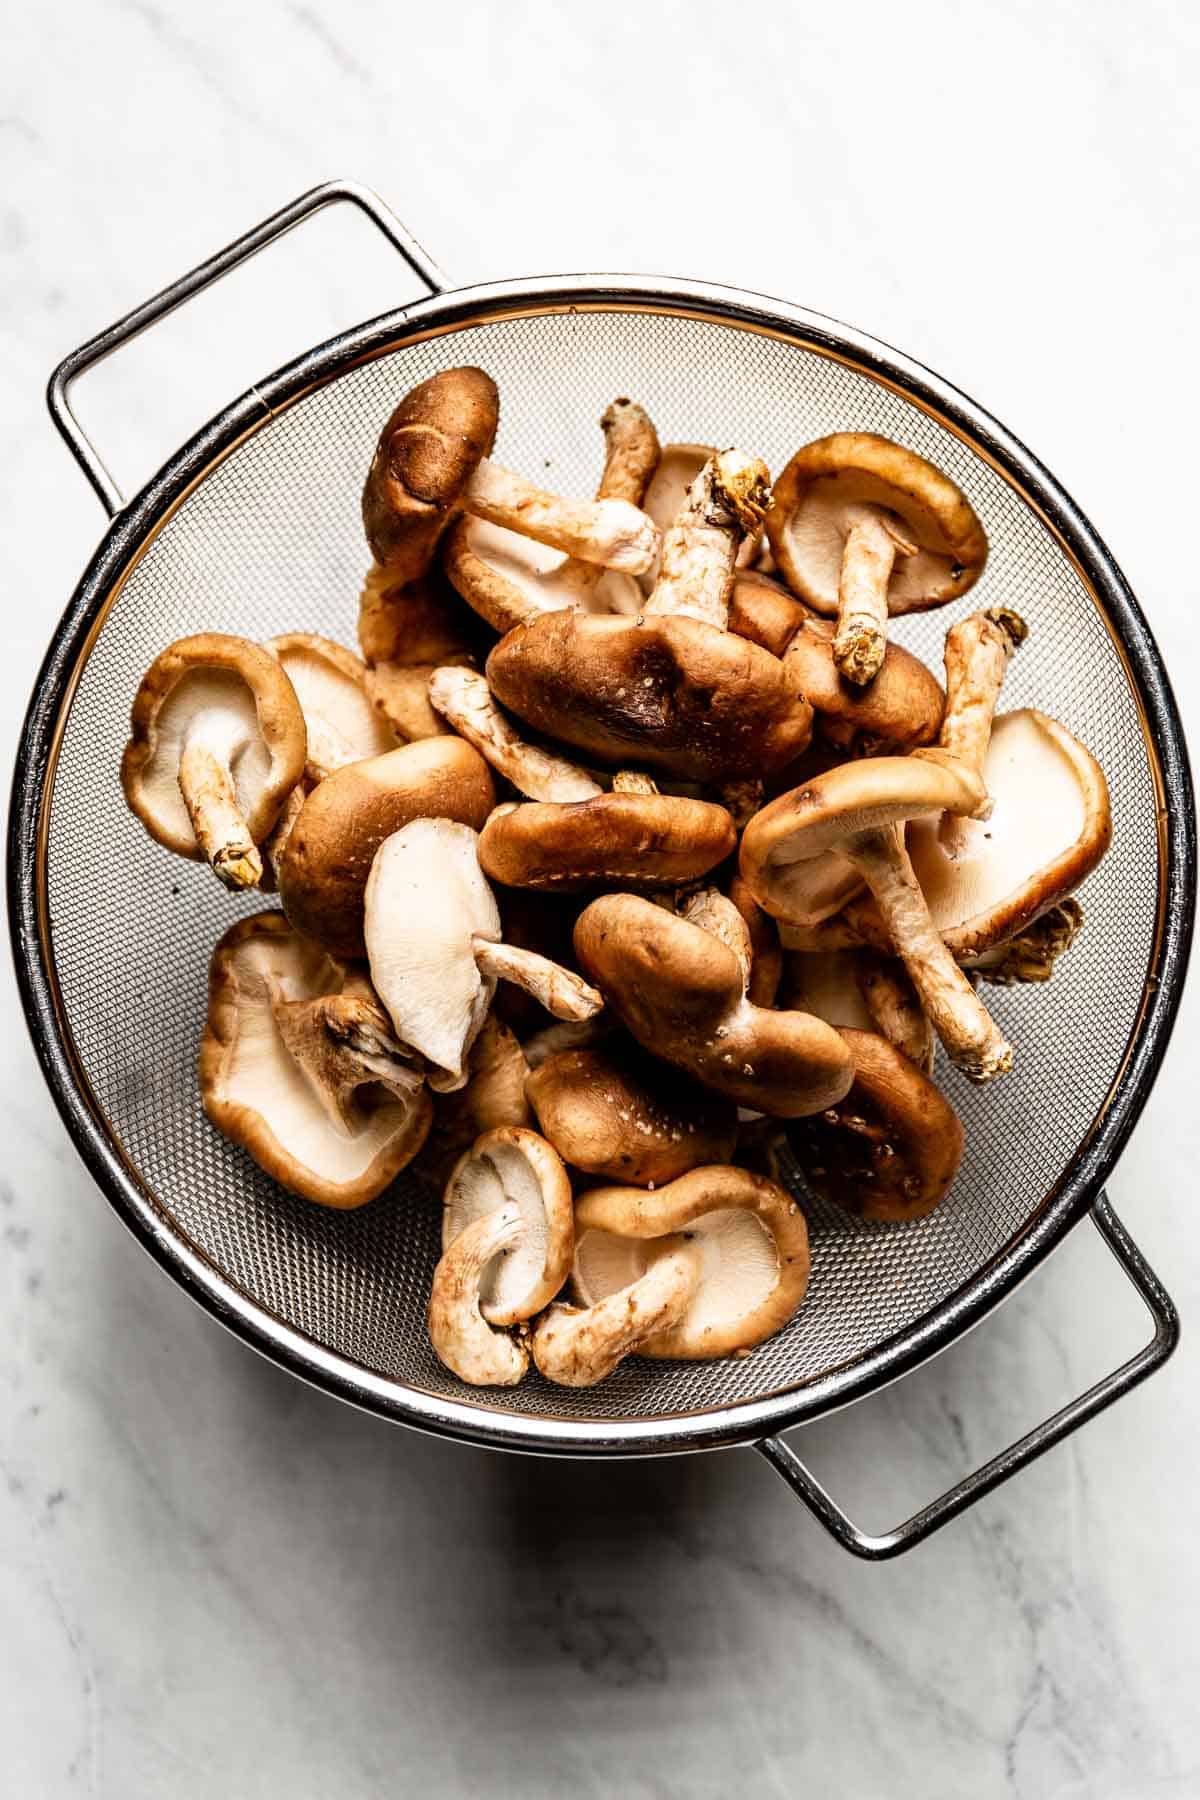 https://foolproofliving.com/wp-content/uploads/2022/03/How-to-clean-shiitake-mushrooms.jpg